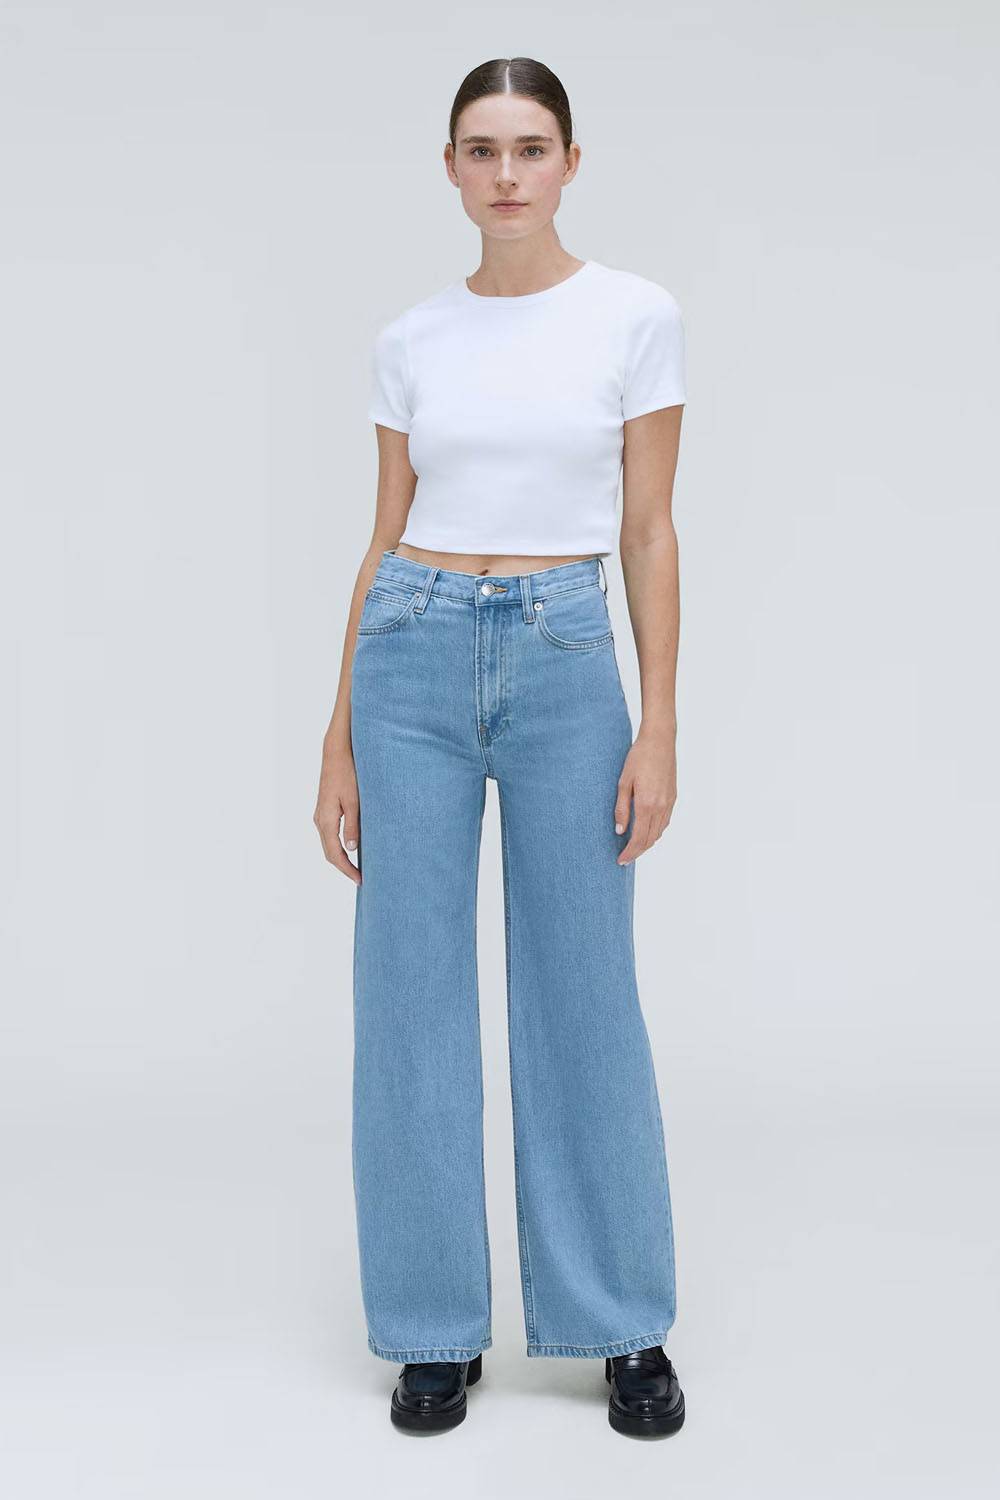 20 Best Sustainable Wide-Leg Pants And Jeans | Panaprium